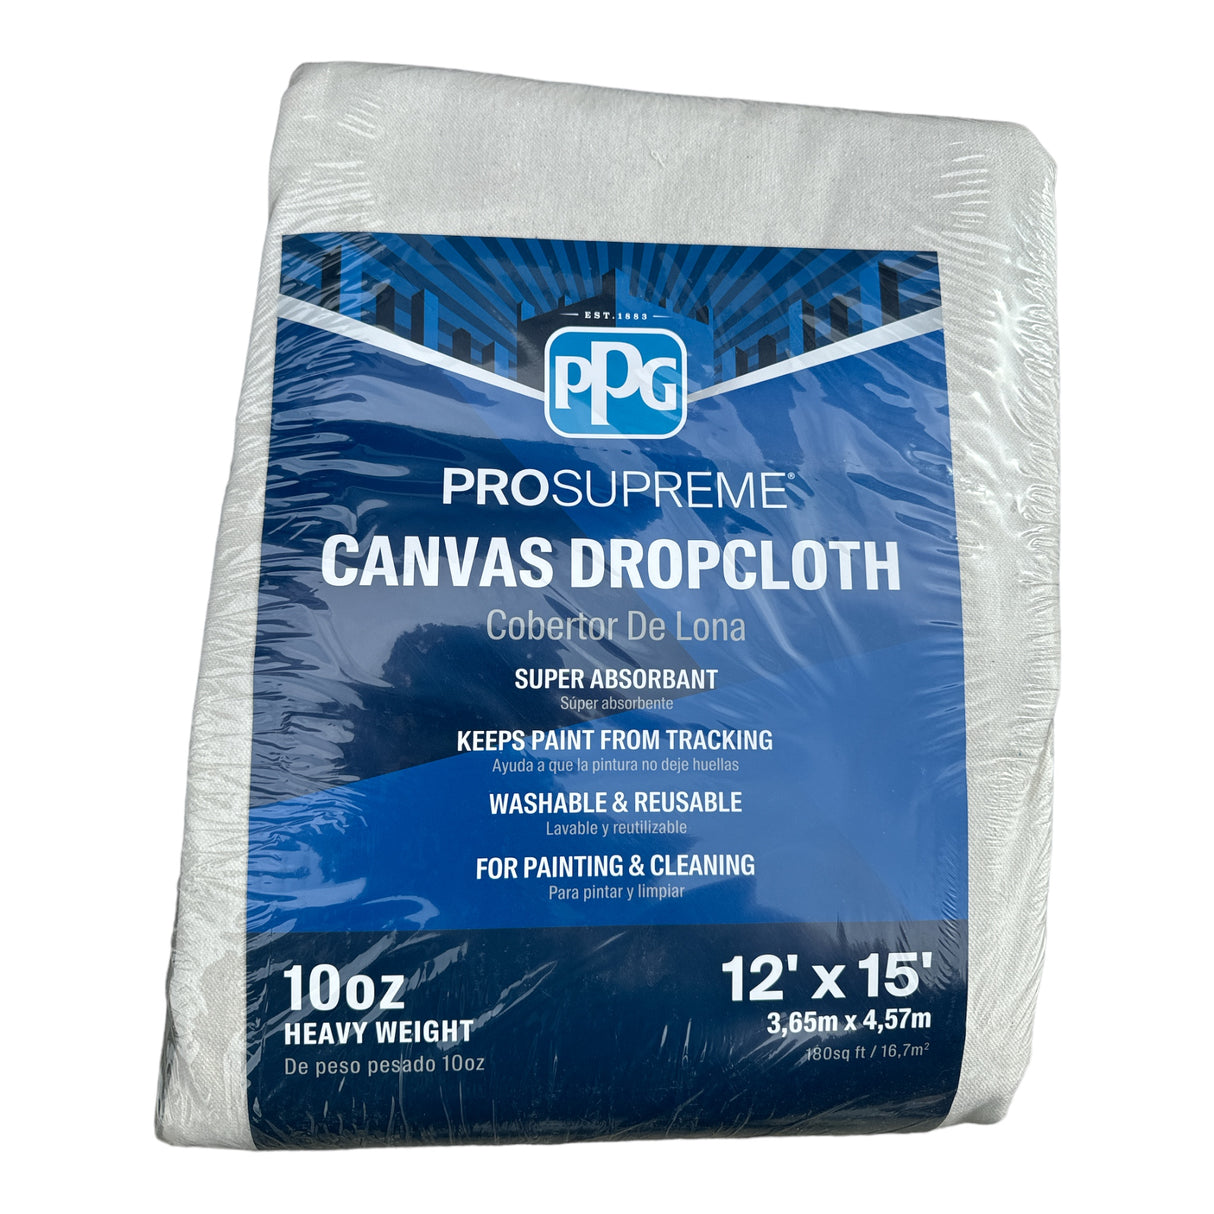 PPG ProSupreme Canvas Drop Cloth 12-Ft x 15-Ft (Heavy Weight, 10oz)